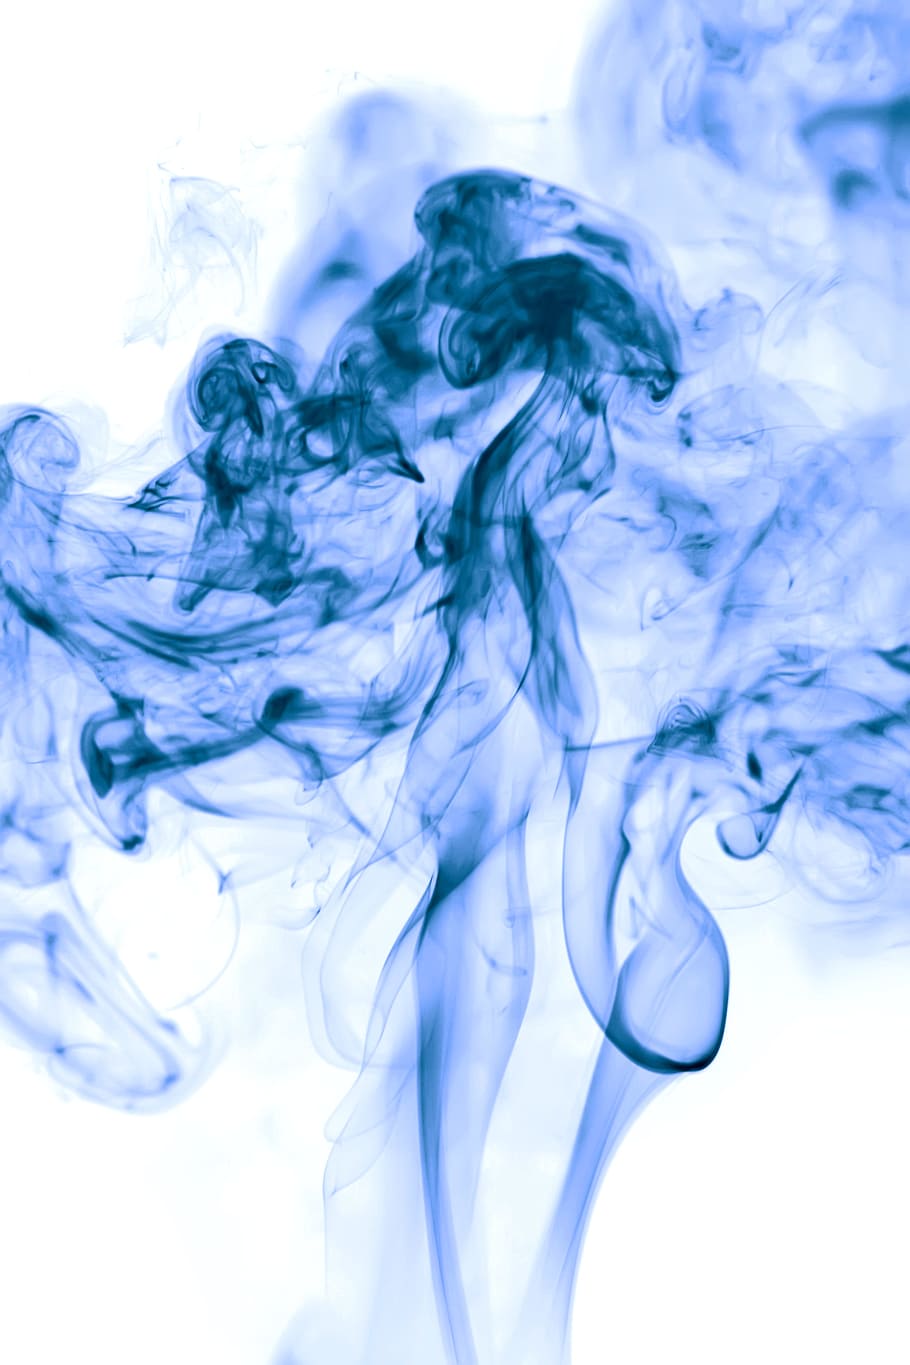 smoke, smell, color, aroma, abstract, background, aromatherapy, motion, smoke - physical structure, swirl